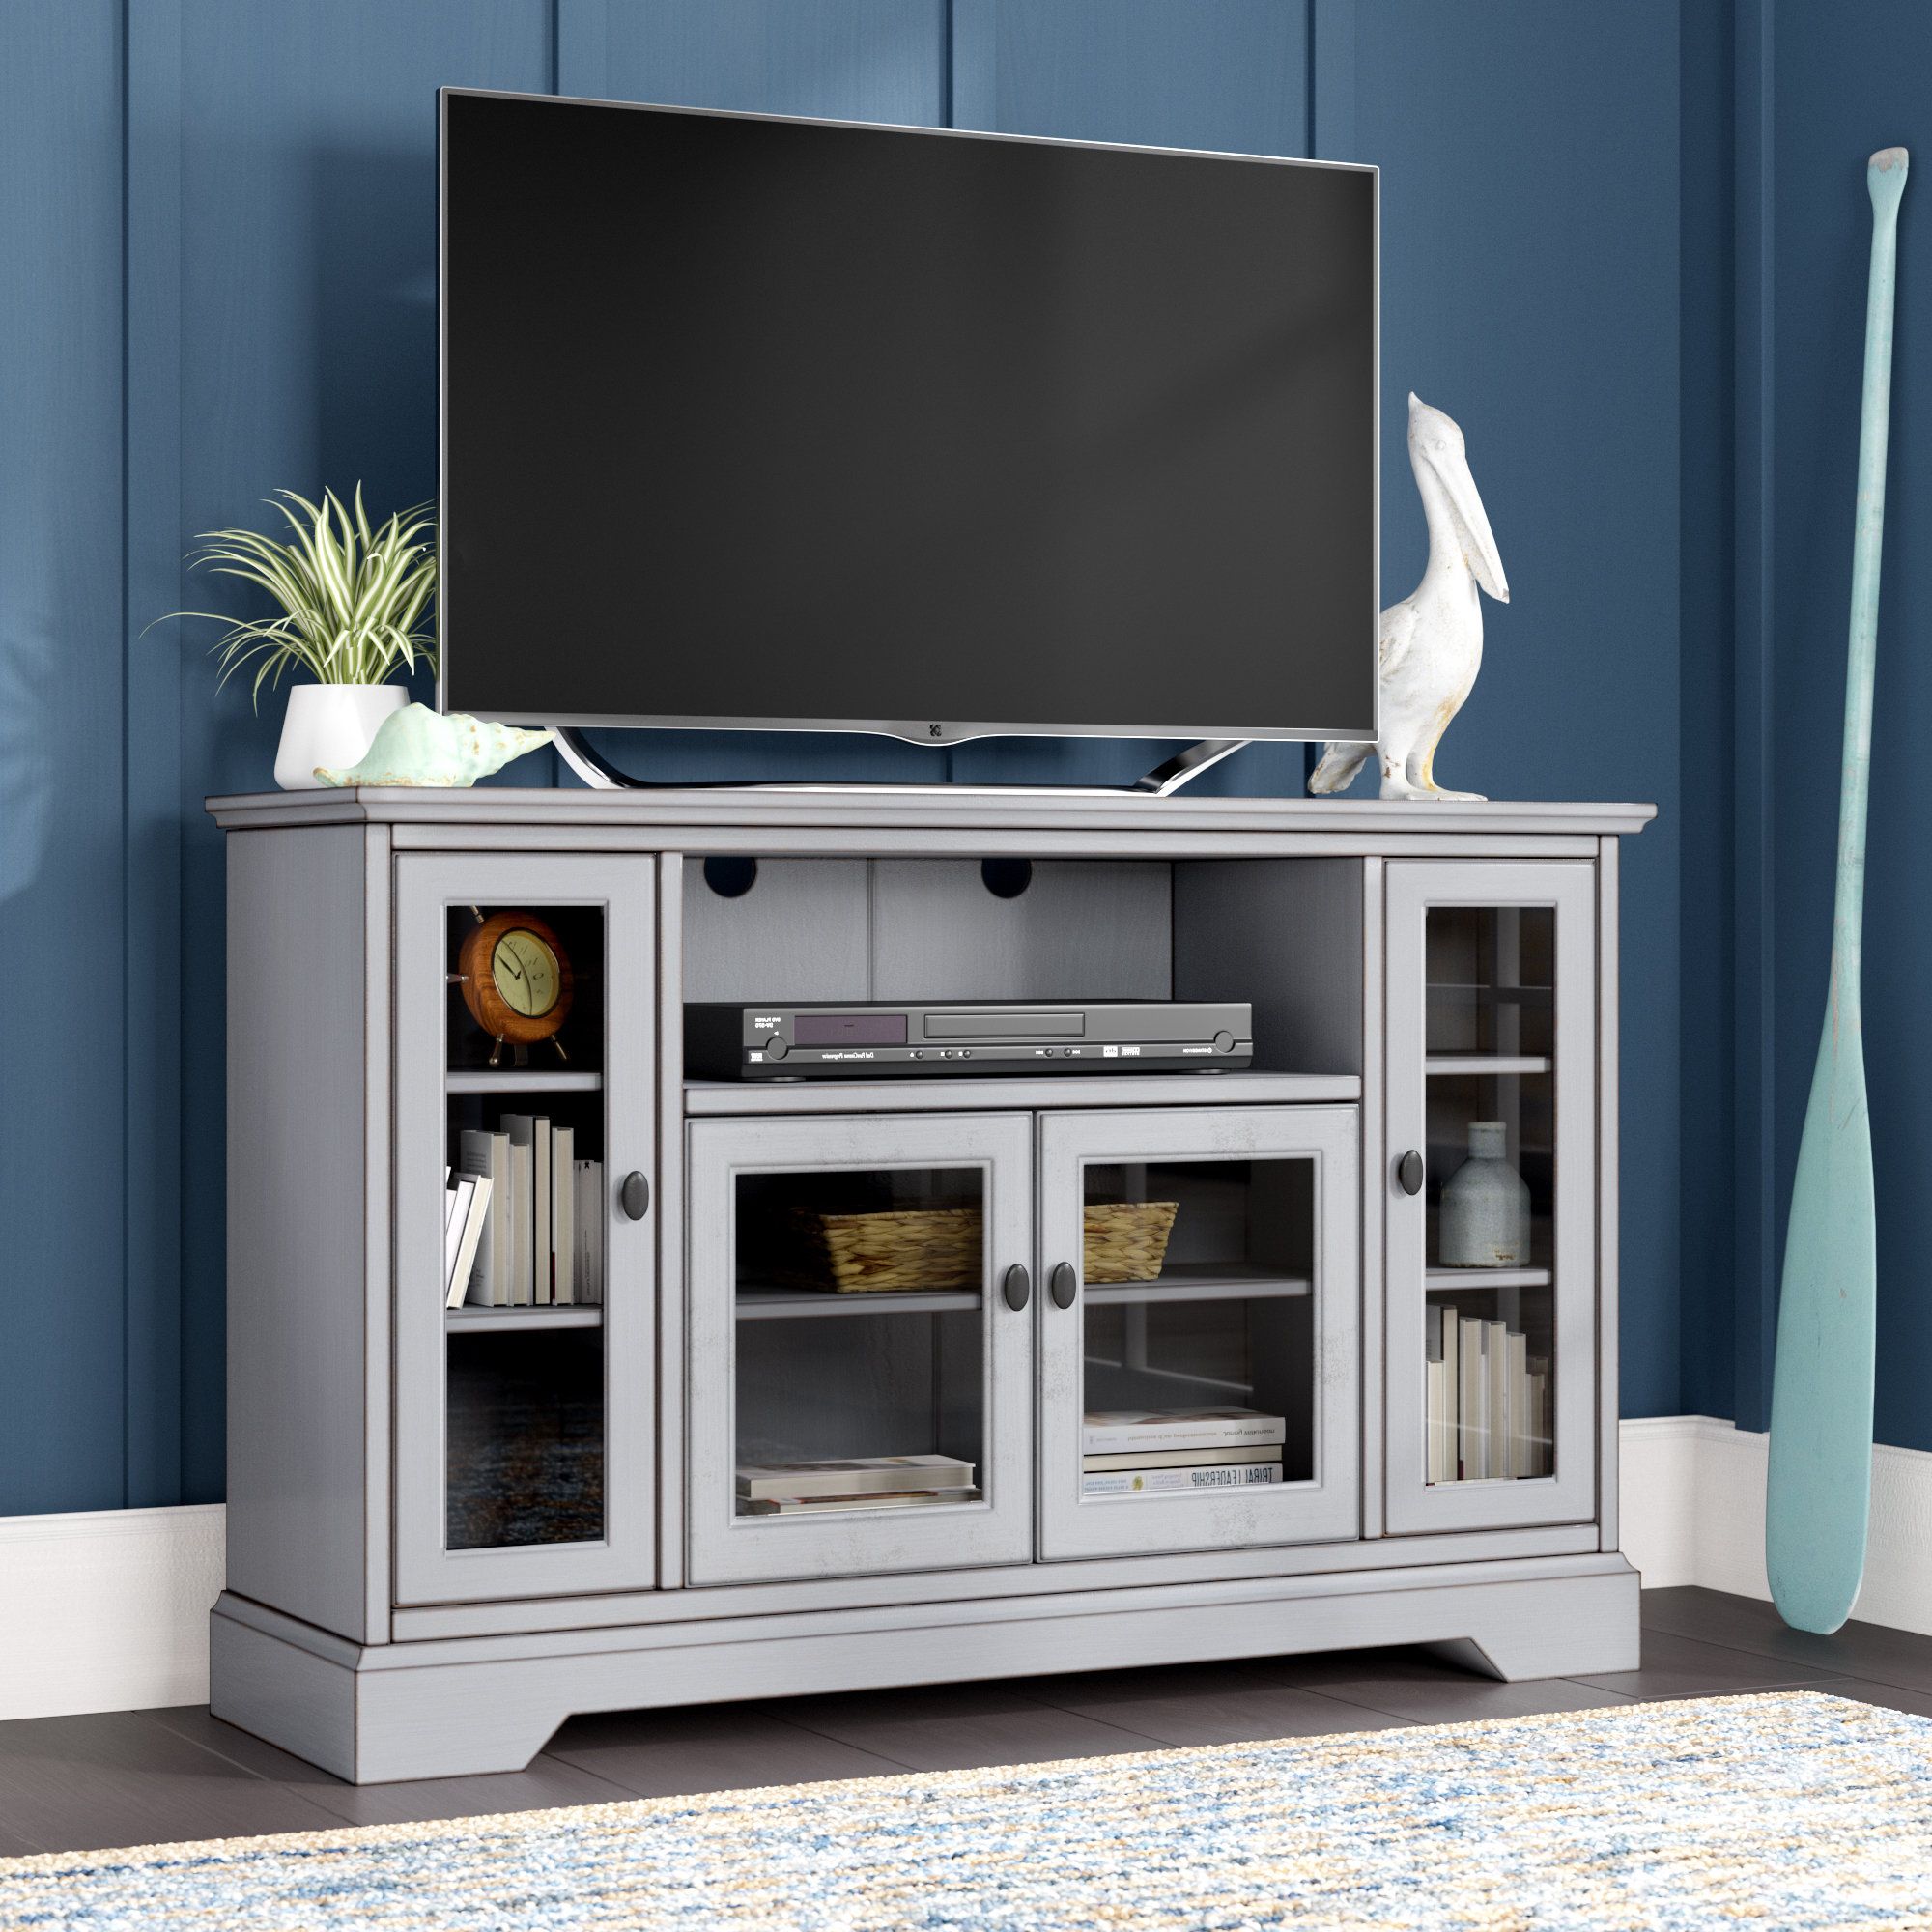 Wayfair Intended For Laurent 60 Inch Tv Stands (View 9 of 20)